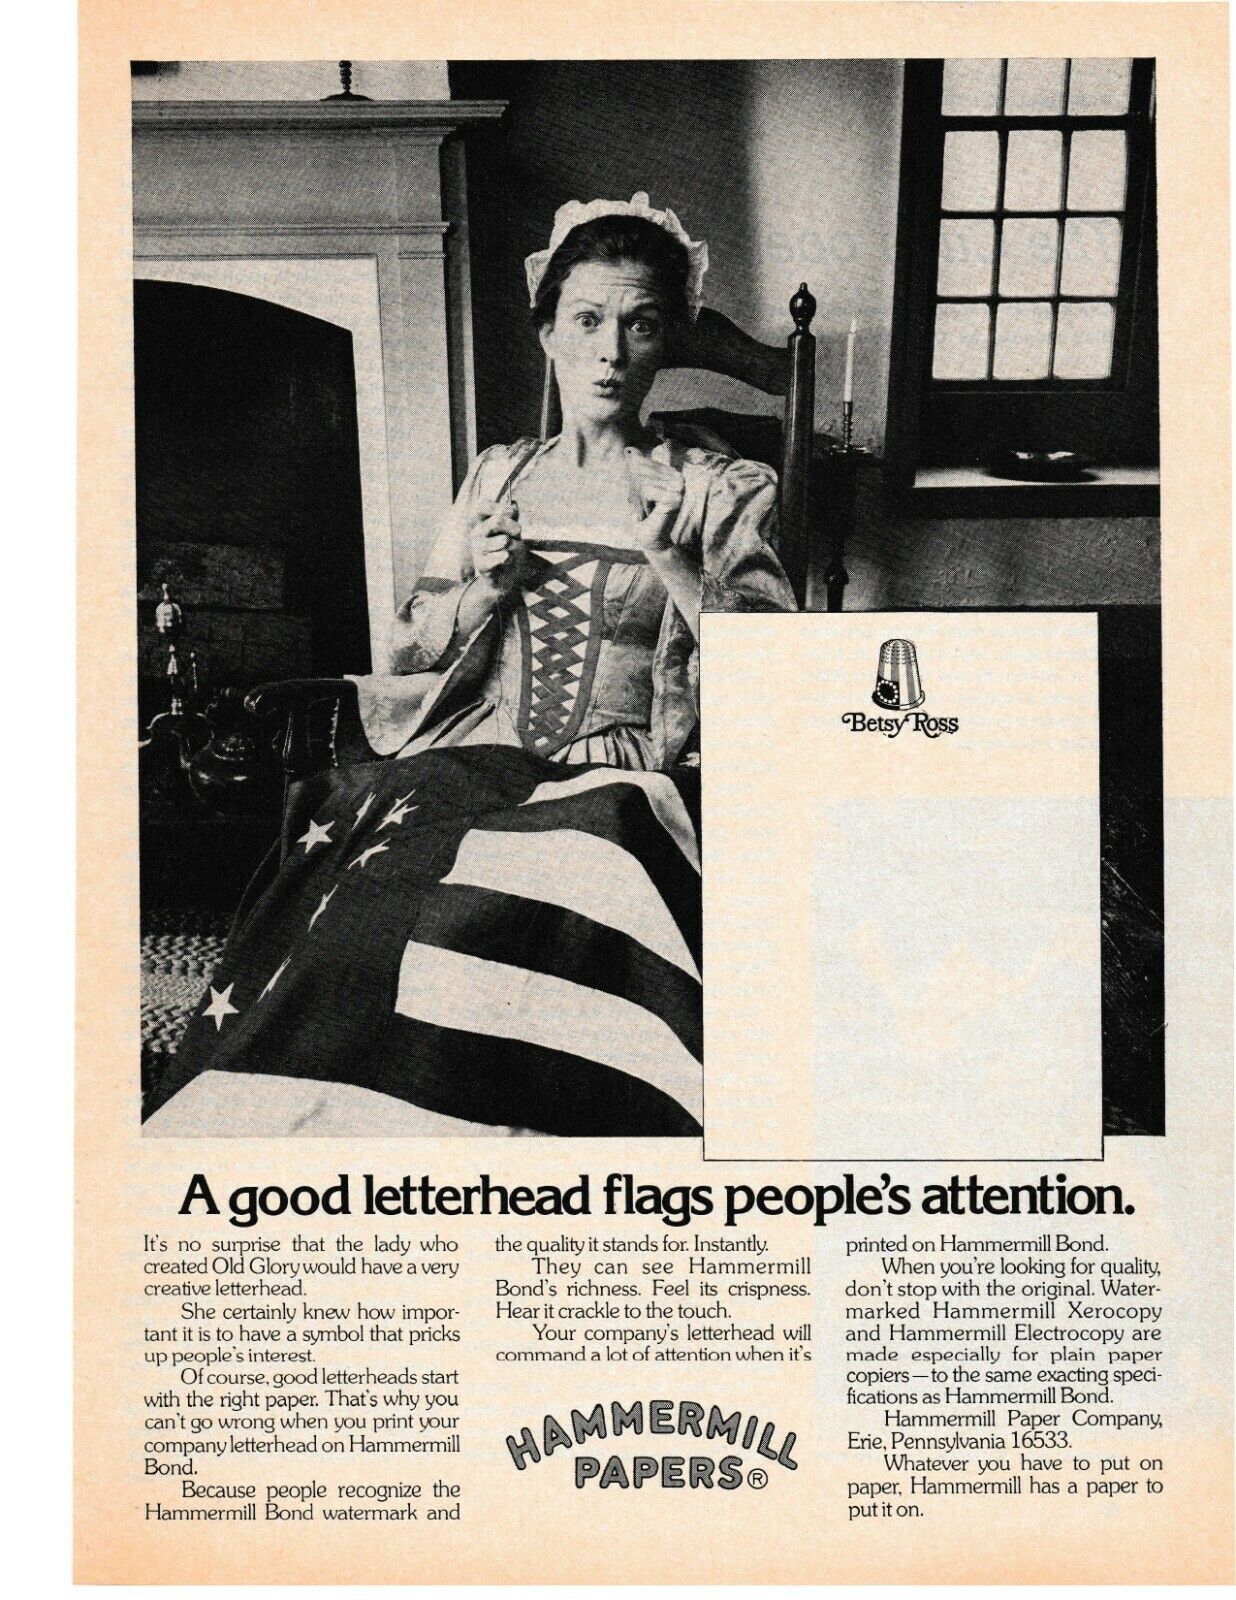 1975 VINTAGE PRINT AD - HAMMERMILL PAPERS AD - BETSY ROSS